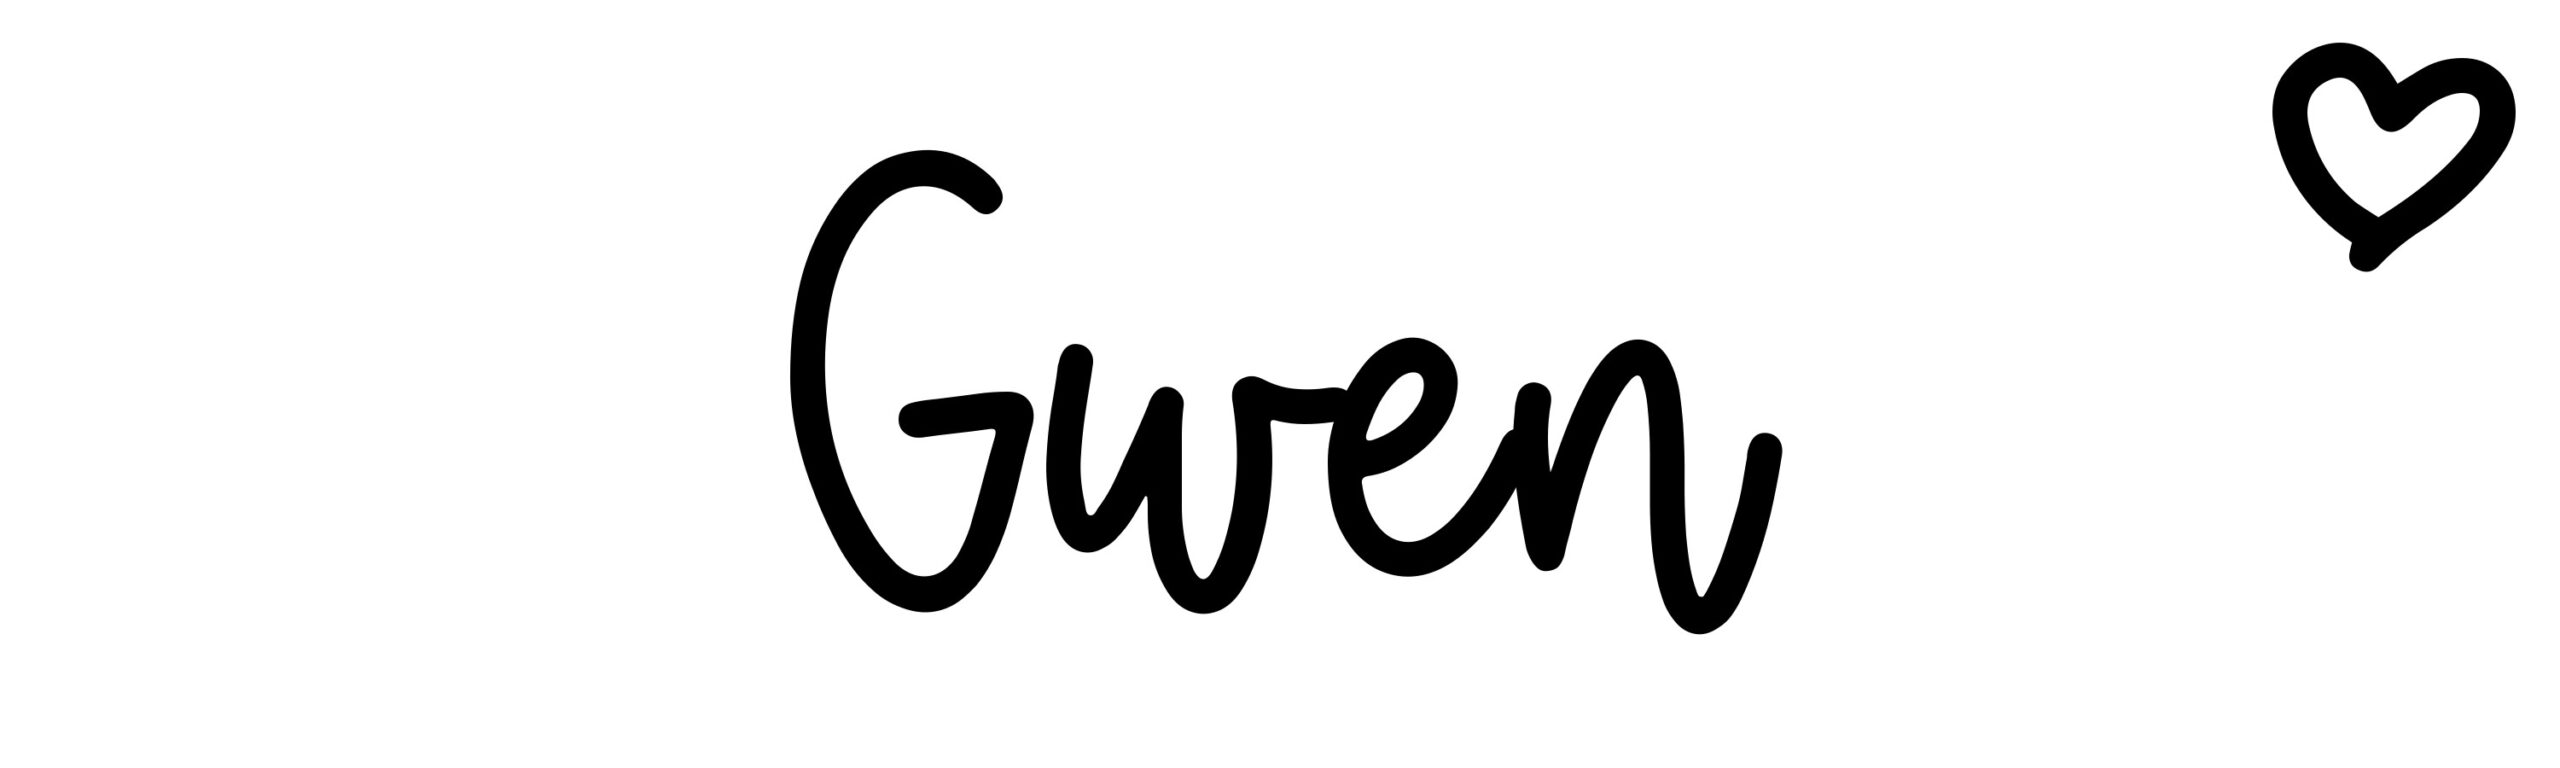 Gwen - Name meaning, origin, variations and more